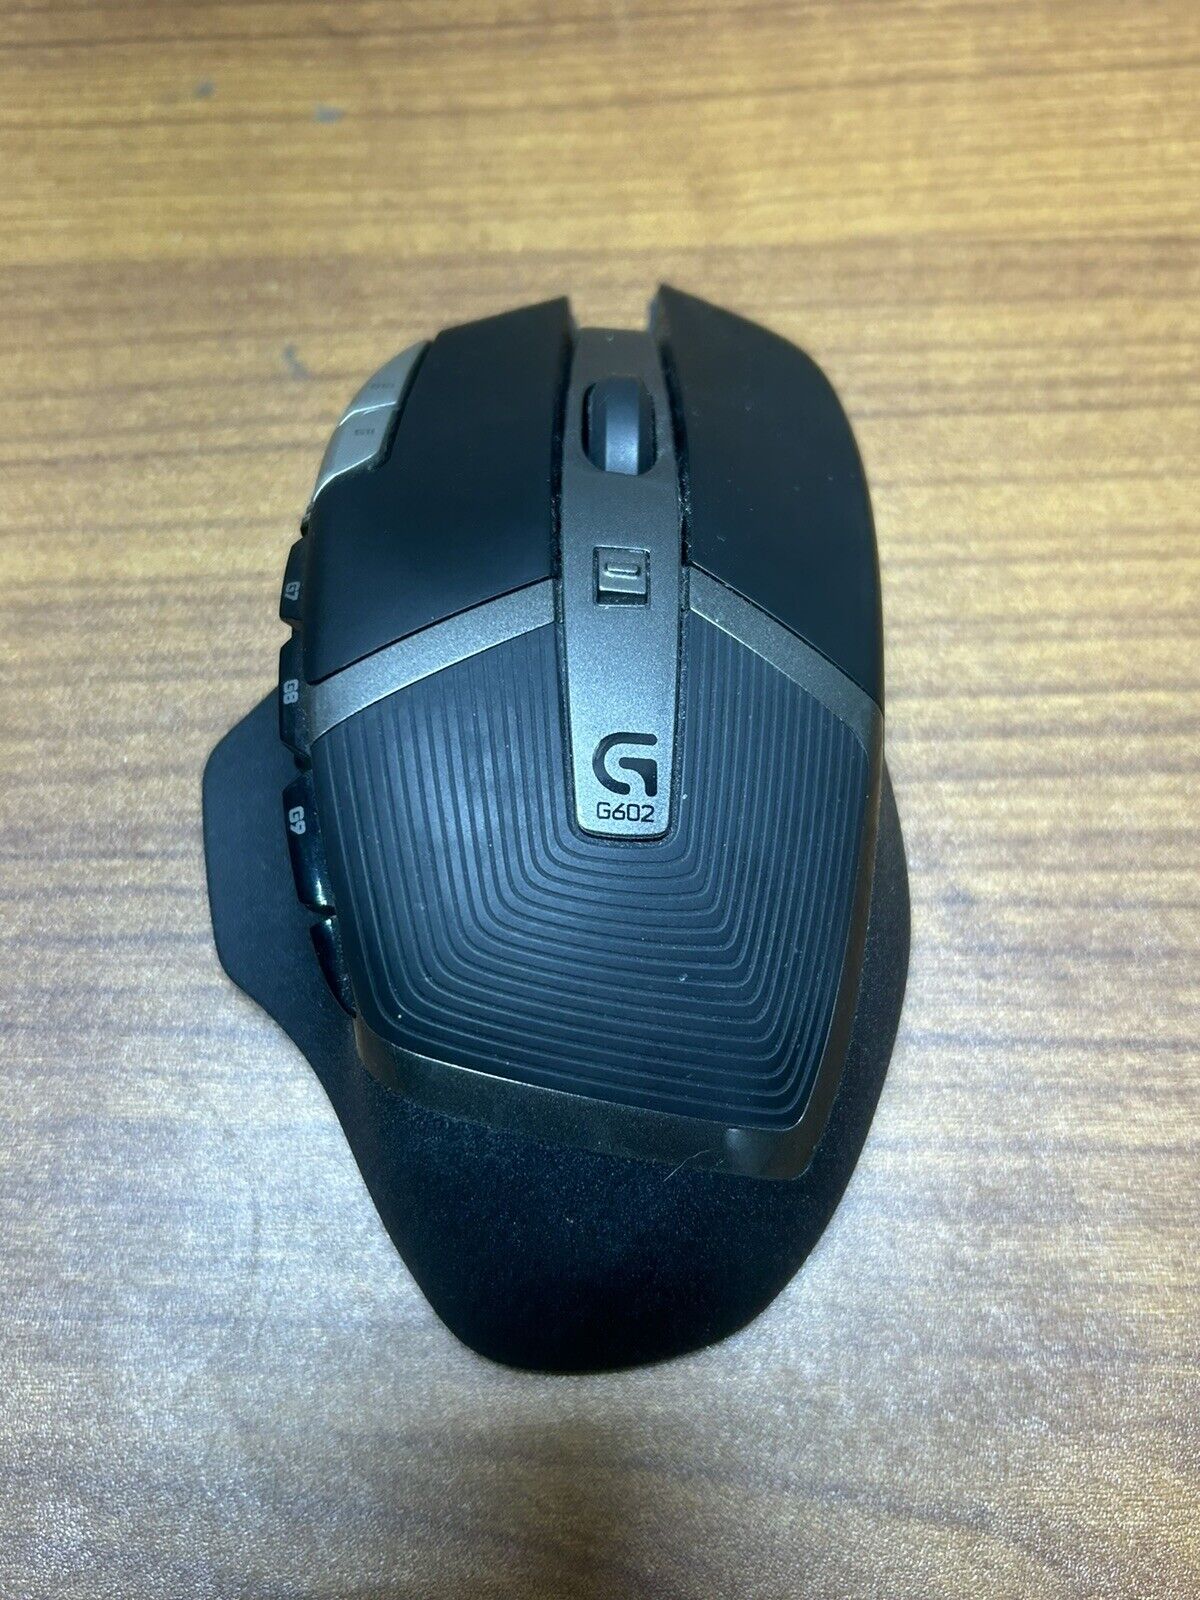 Logitech G602 (910-003820) Wireless Gaming Mouse No Dongle